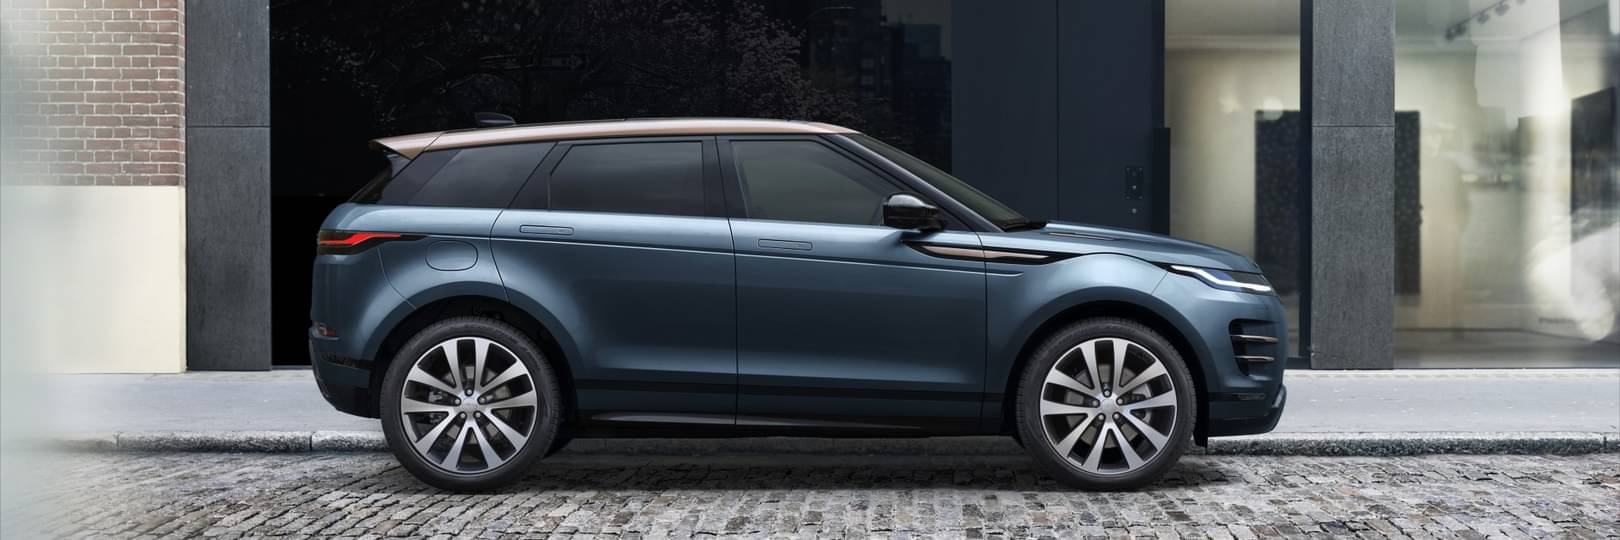 Range Rover Evoque: Crafted without compromise